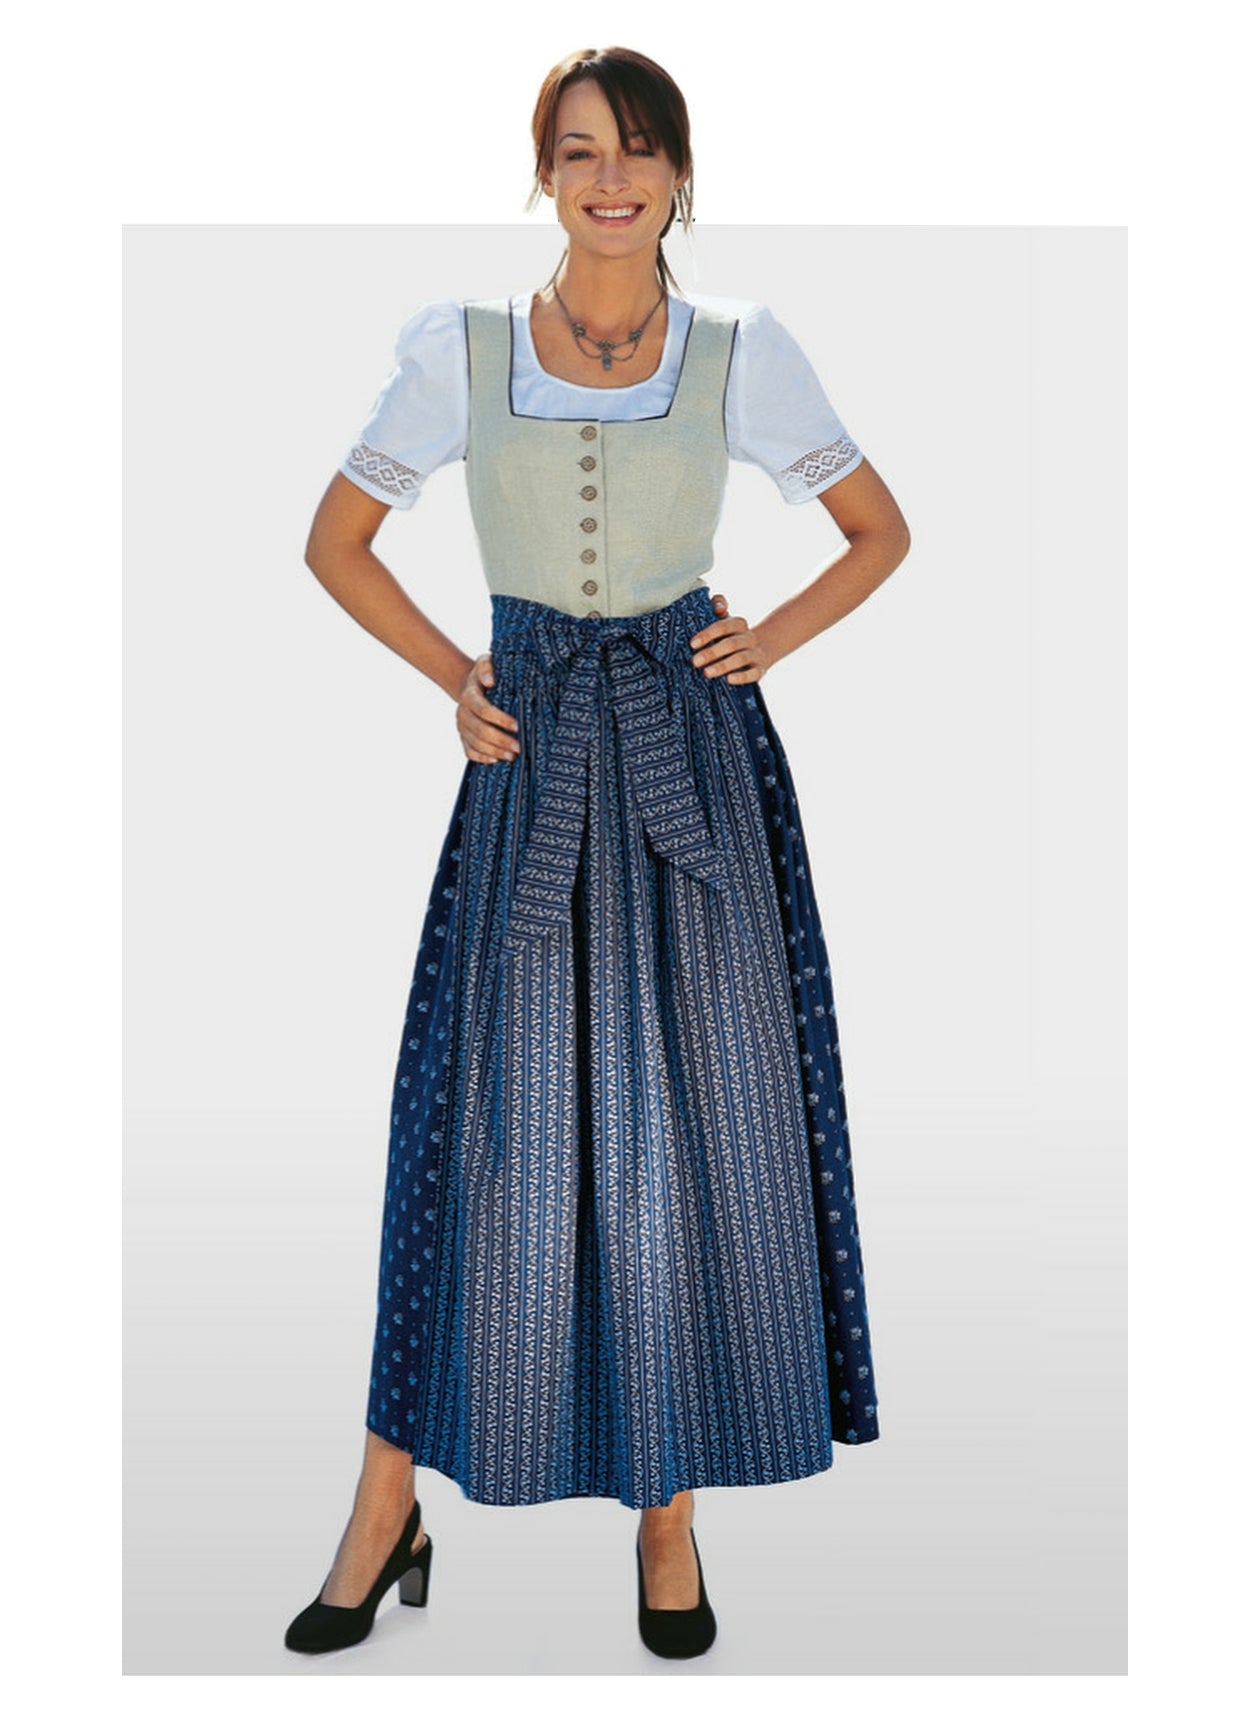 BD8448 Misses Dirndl Dress pattern from Jaycotts Sewing Supplies